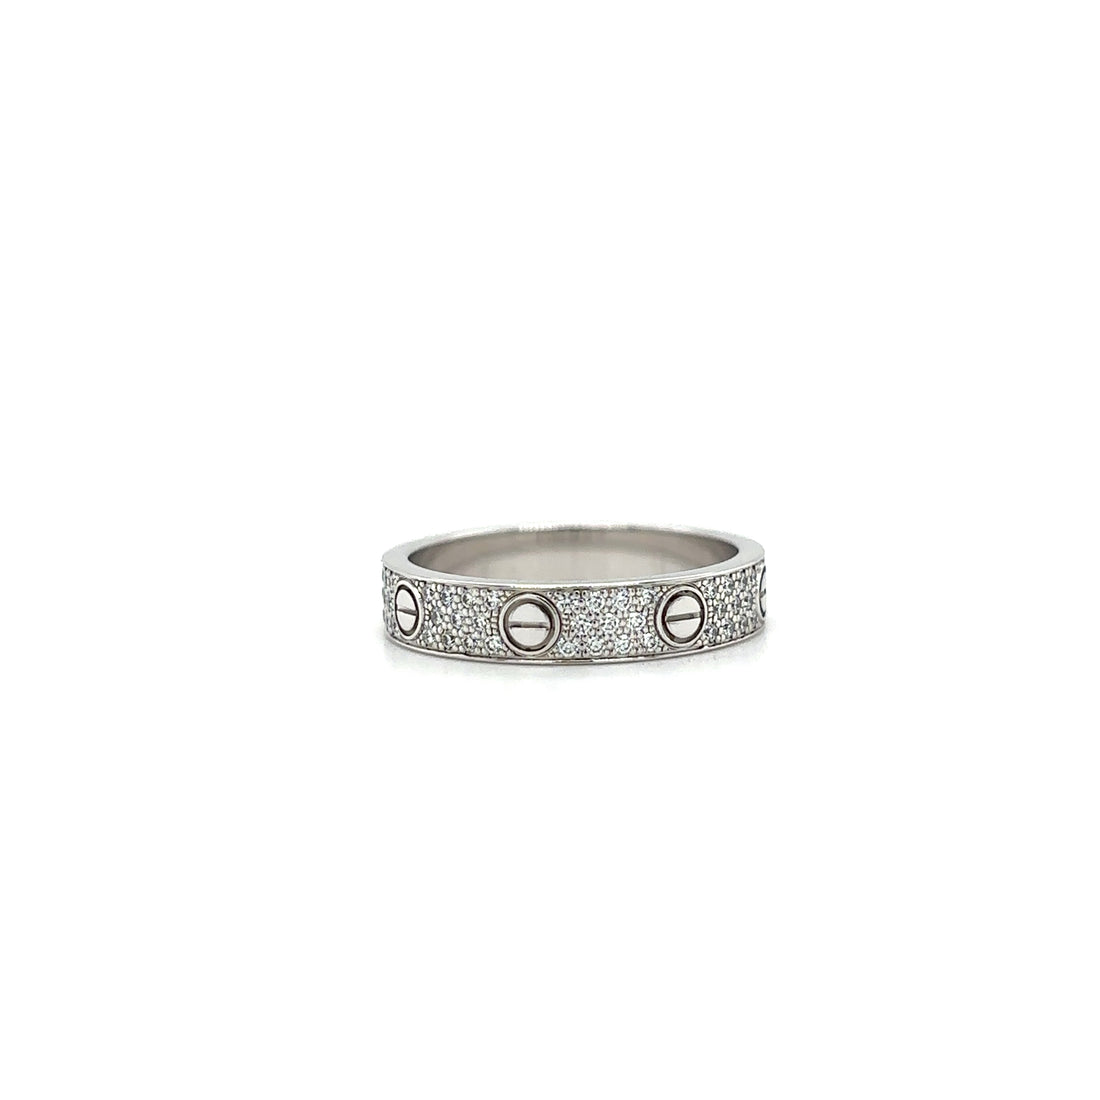 Cartier 18ct White Gold Love Wedding Band Diamond Paved Ring